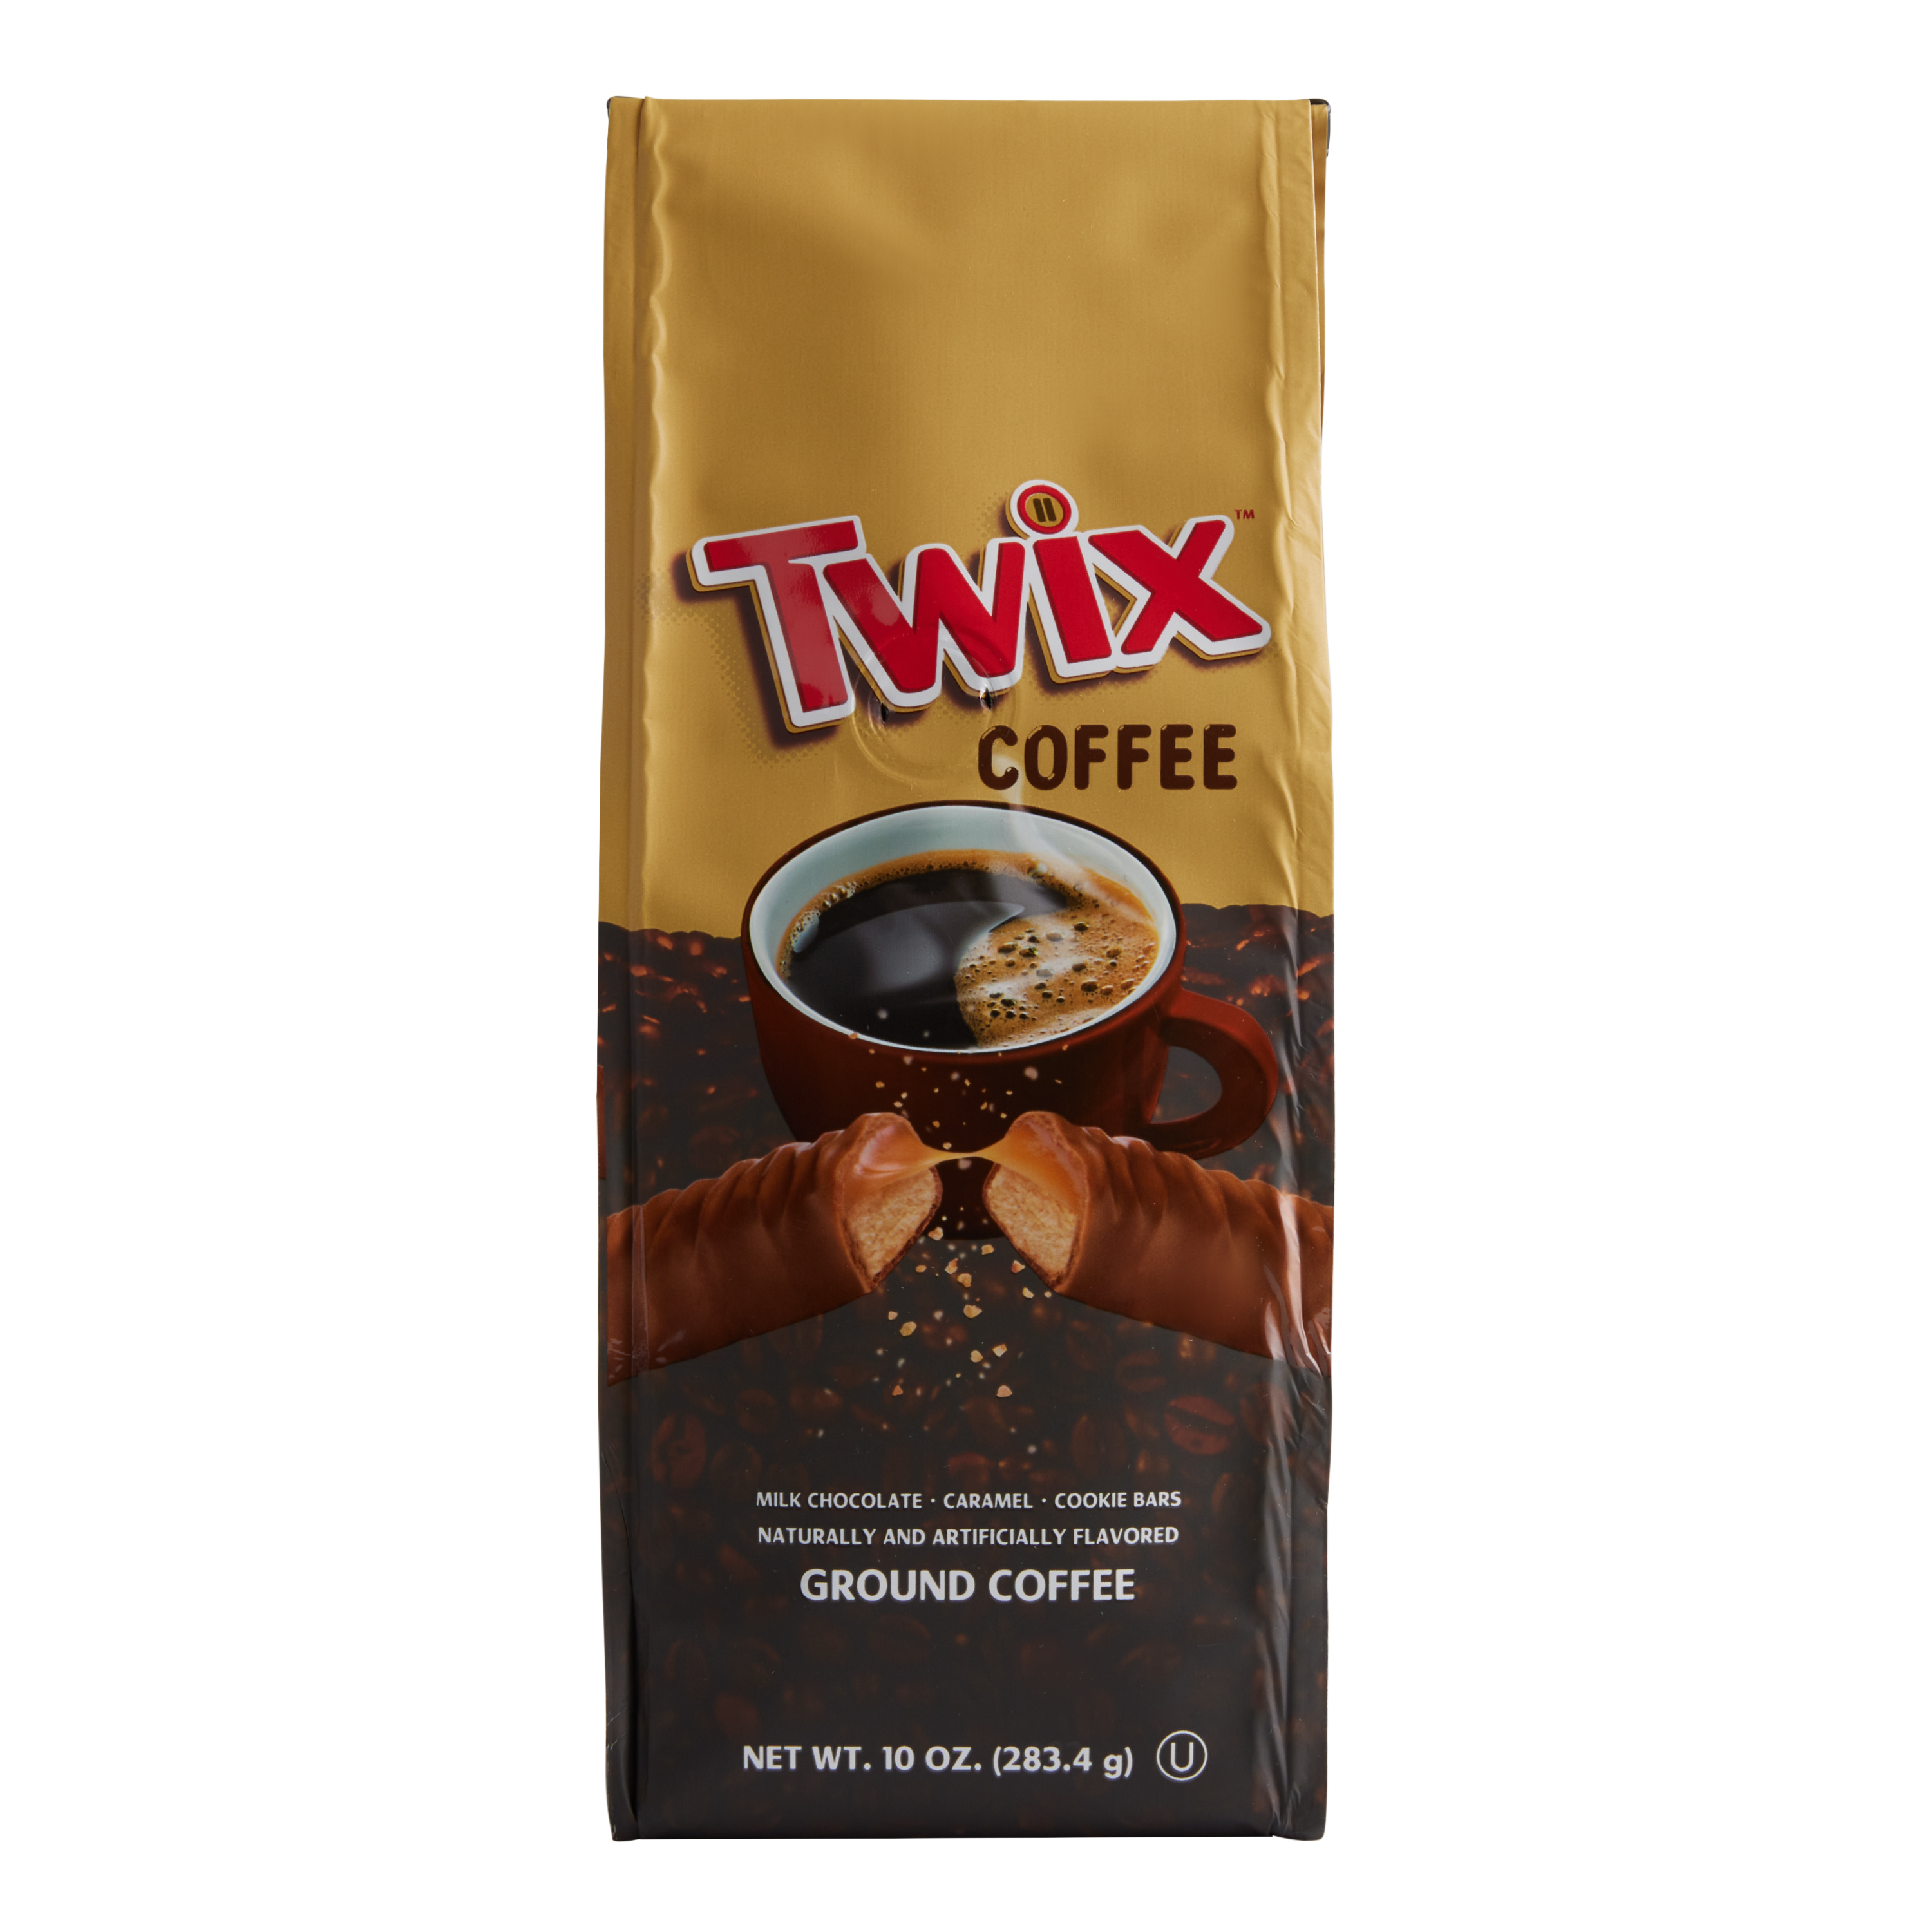 Yes, TWIX can pretty much go on anything now.